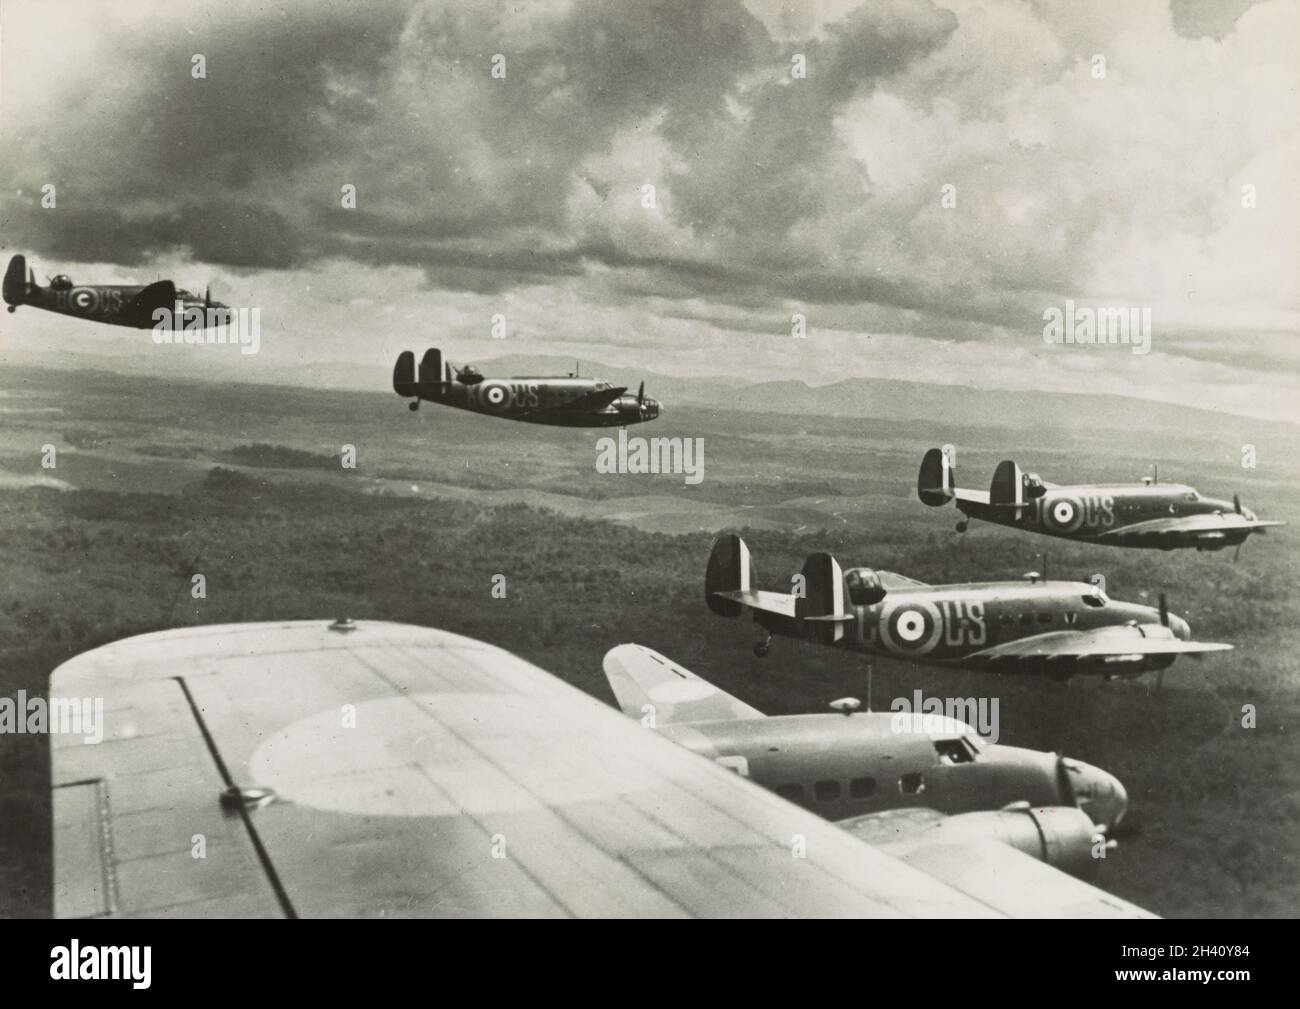 Vintage photo circa 1942 of a flight of Lockheed Hudson Mk.I bombers of the Royal Australian Air Force number 1 squadron flying over Malaya during the Japanese invasion of Malaya and the fall of Singapore.  No. 1 Squadron launched a series of assaults on the Japanese forces, becoming the first aircraft to make an attack in the Pacific War. The Hudsons sank a Japanese transport ship, the IJN Awazisan Maru, and damaged two more transports, the Ayatosan Maru and Sakura Maru, for the loss of two Hudsons, an hour before the attack on Pearl Harbor Stock Photo